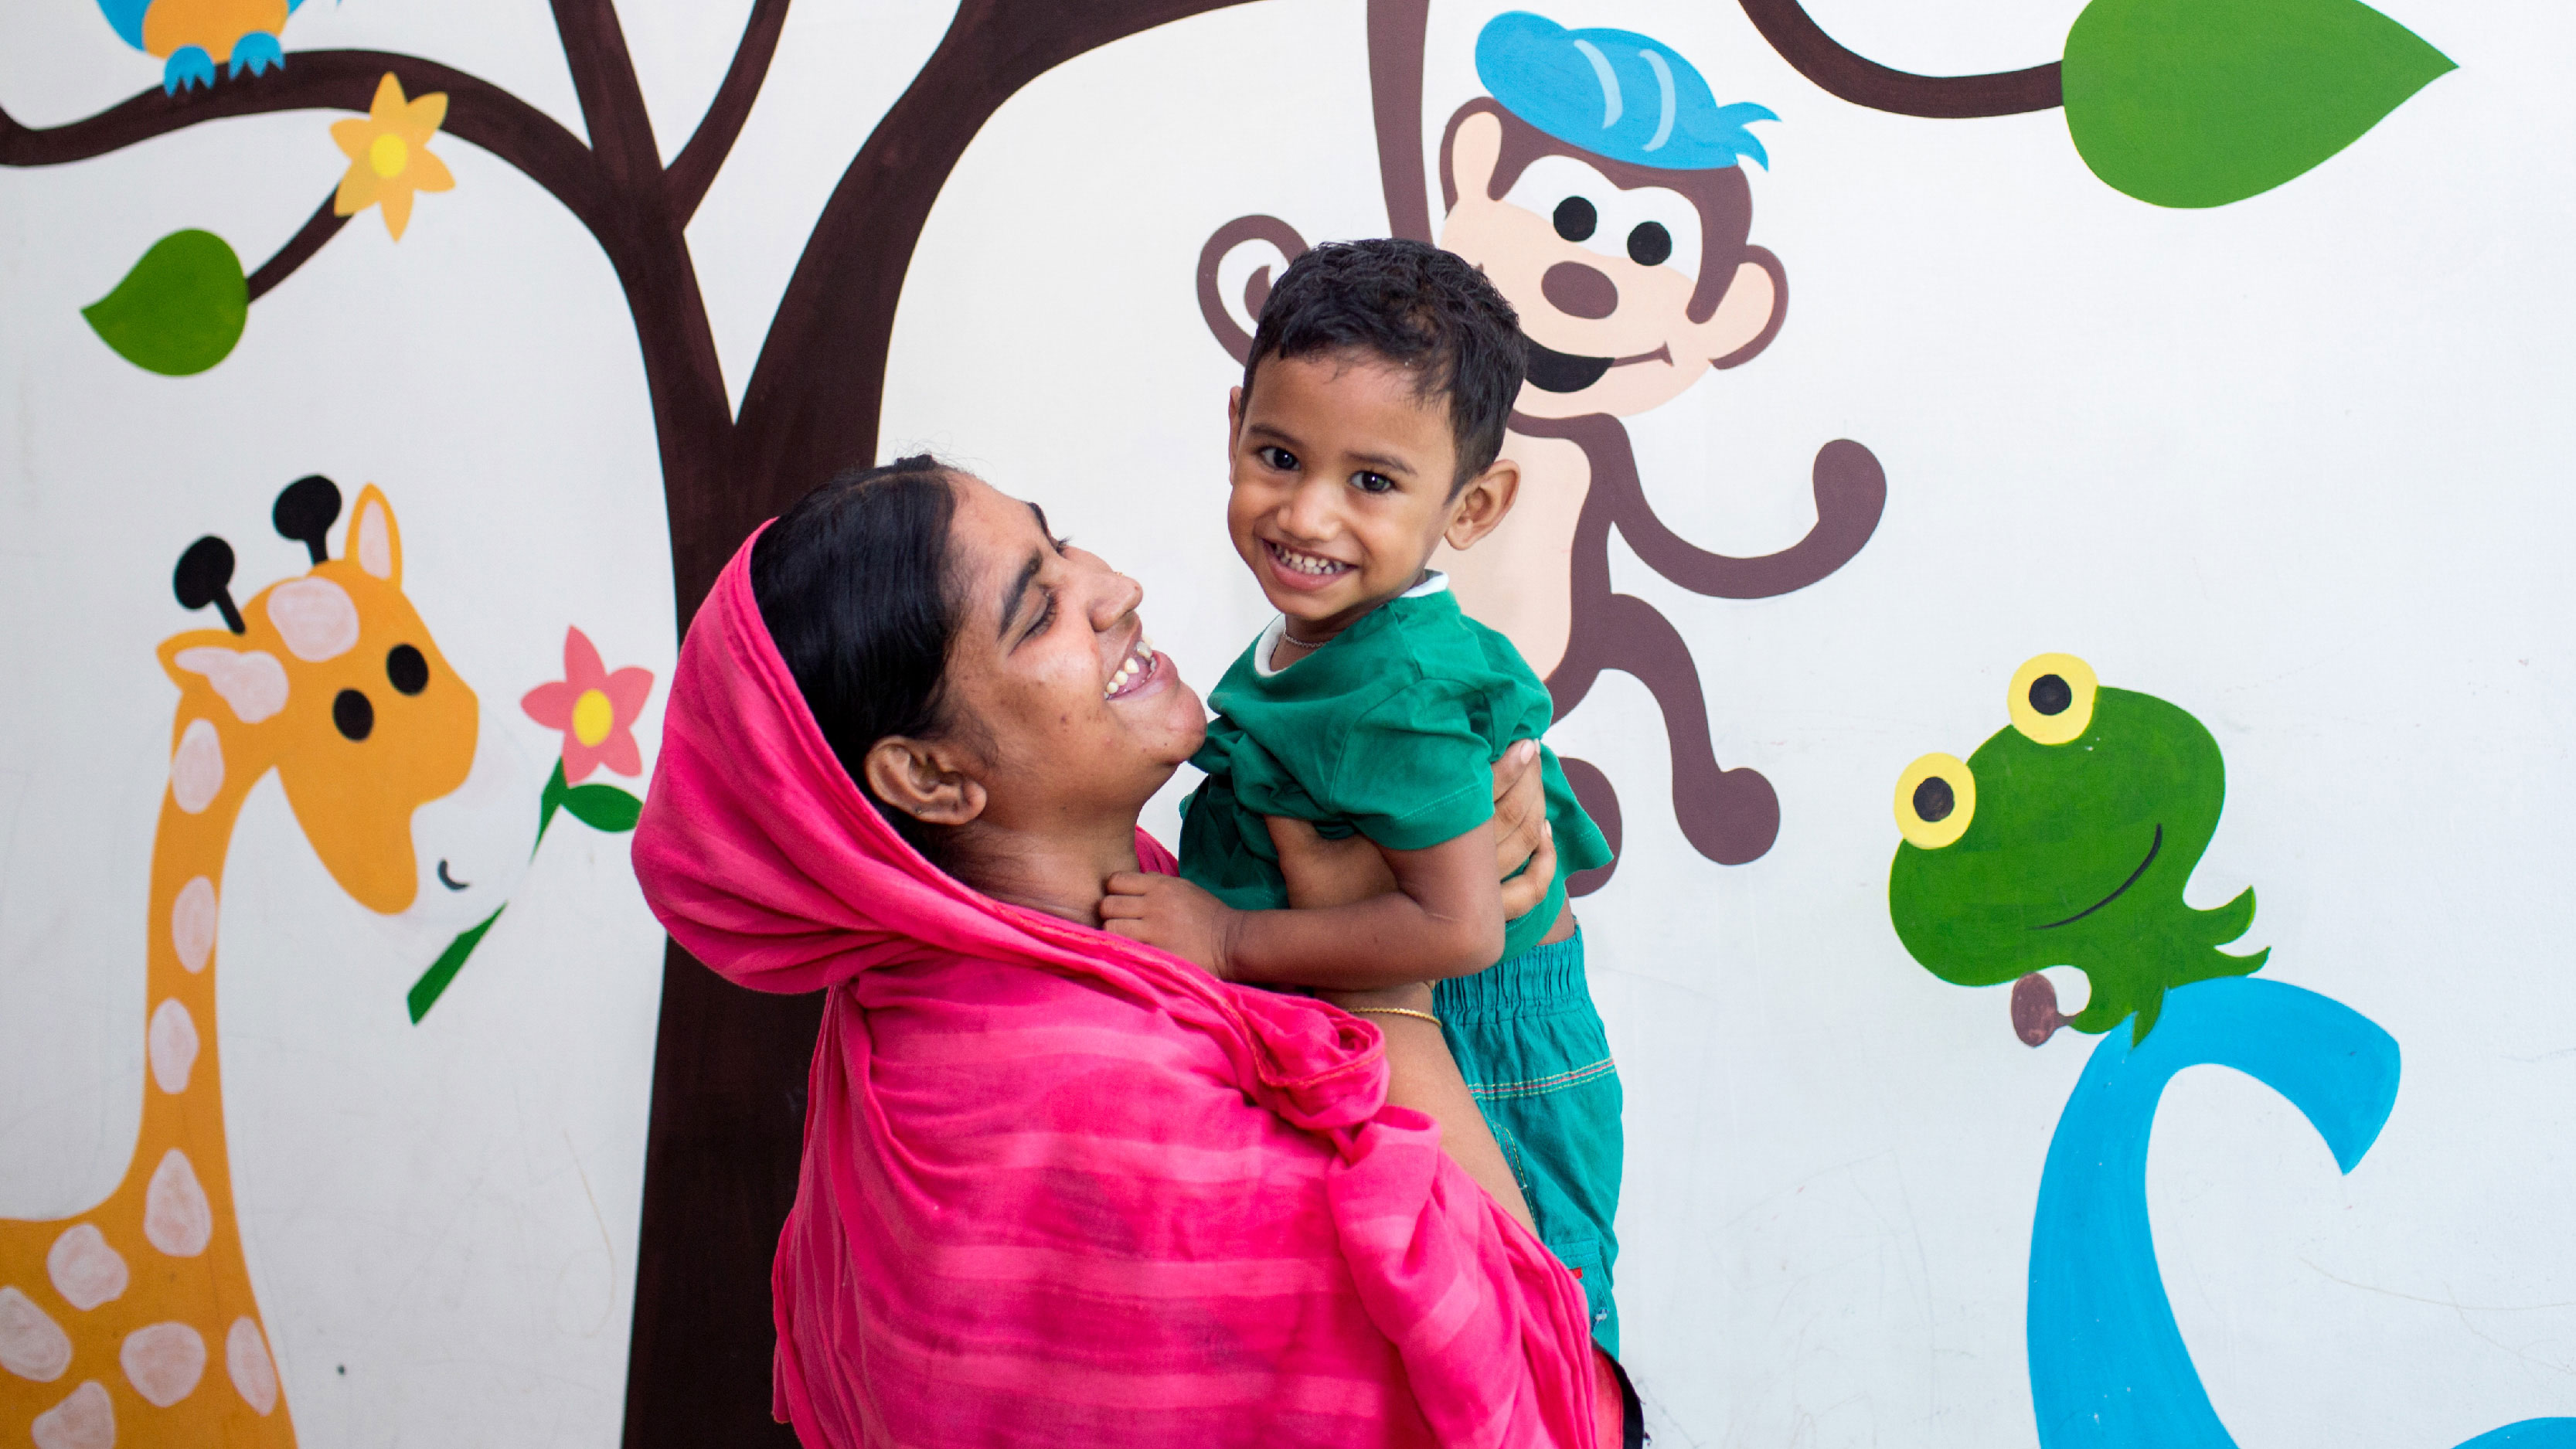 Avery Dennison partners with UNICEF to expand the reach of the Mothers@Work program in Bangladesh